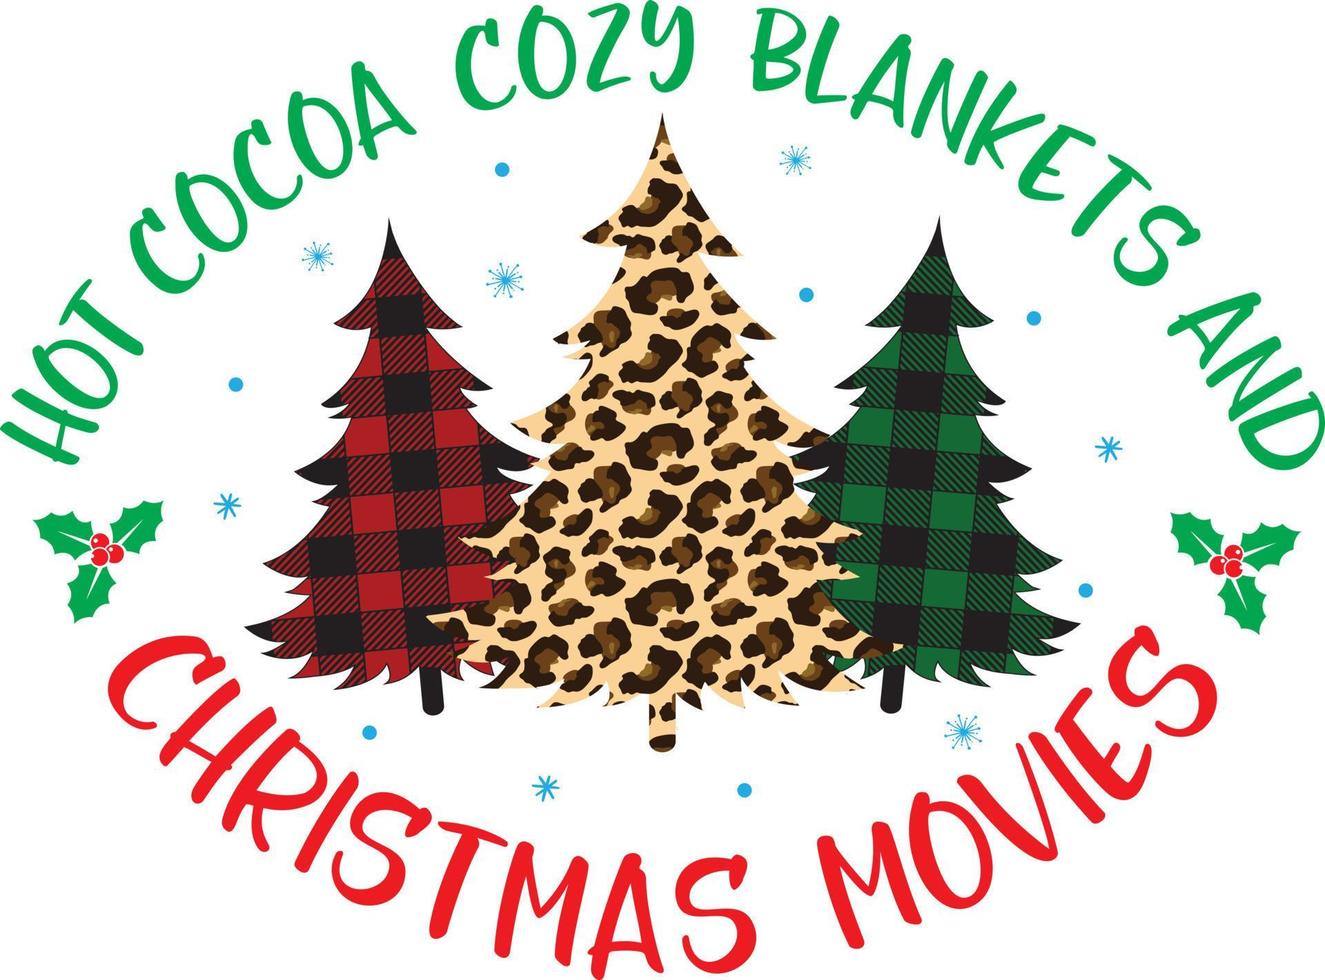 Hot Cocoa, Cozy, Blankets, Christmas Movies, Merry Christmas, Christmas Holiday, Vector Illustration File